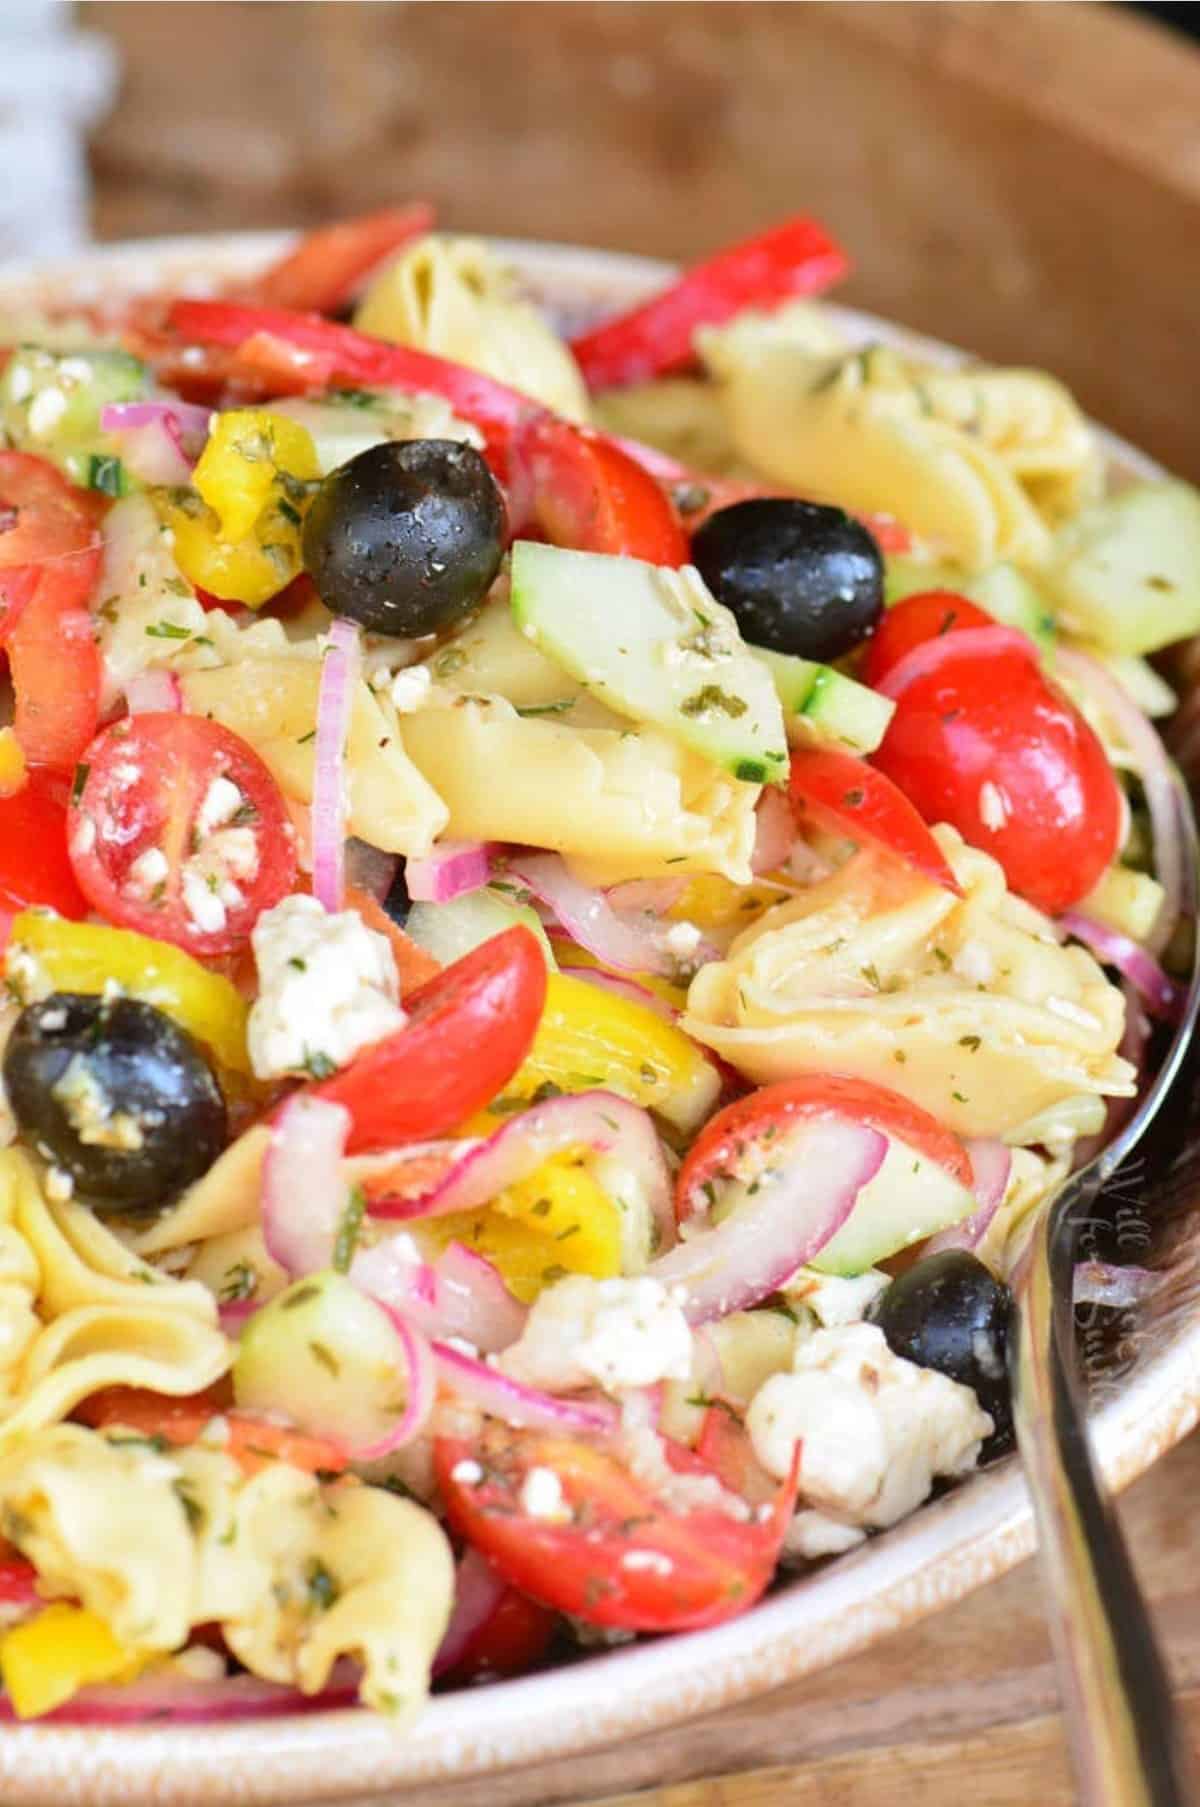 Greek tortellini salad in a brown bowl with a large spoon.